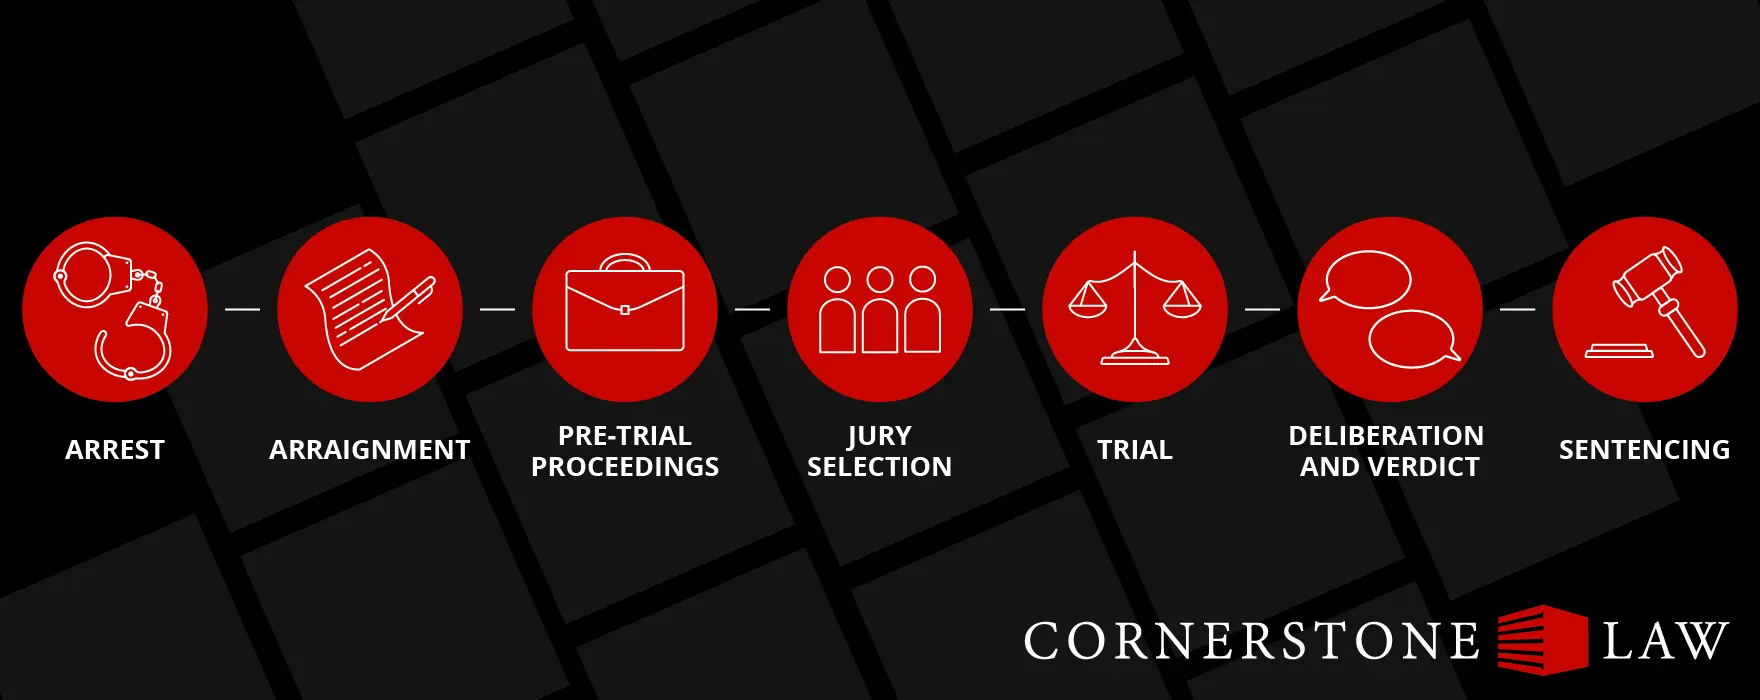 Header image with timeline icons. 1. Arrest, 2. Arraignment, 3. Pre-Trial Proceedings, 4. Jury Selection, 5. Trial, 6. Deliberation and Verdict, 7. Sentencing